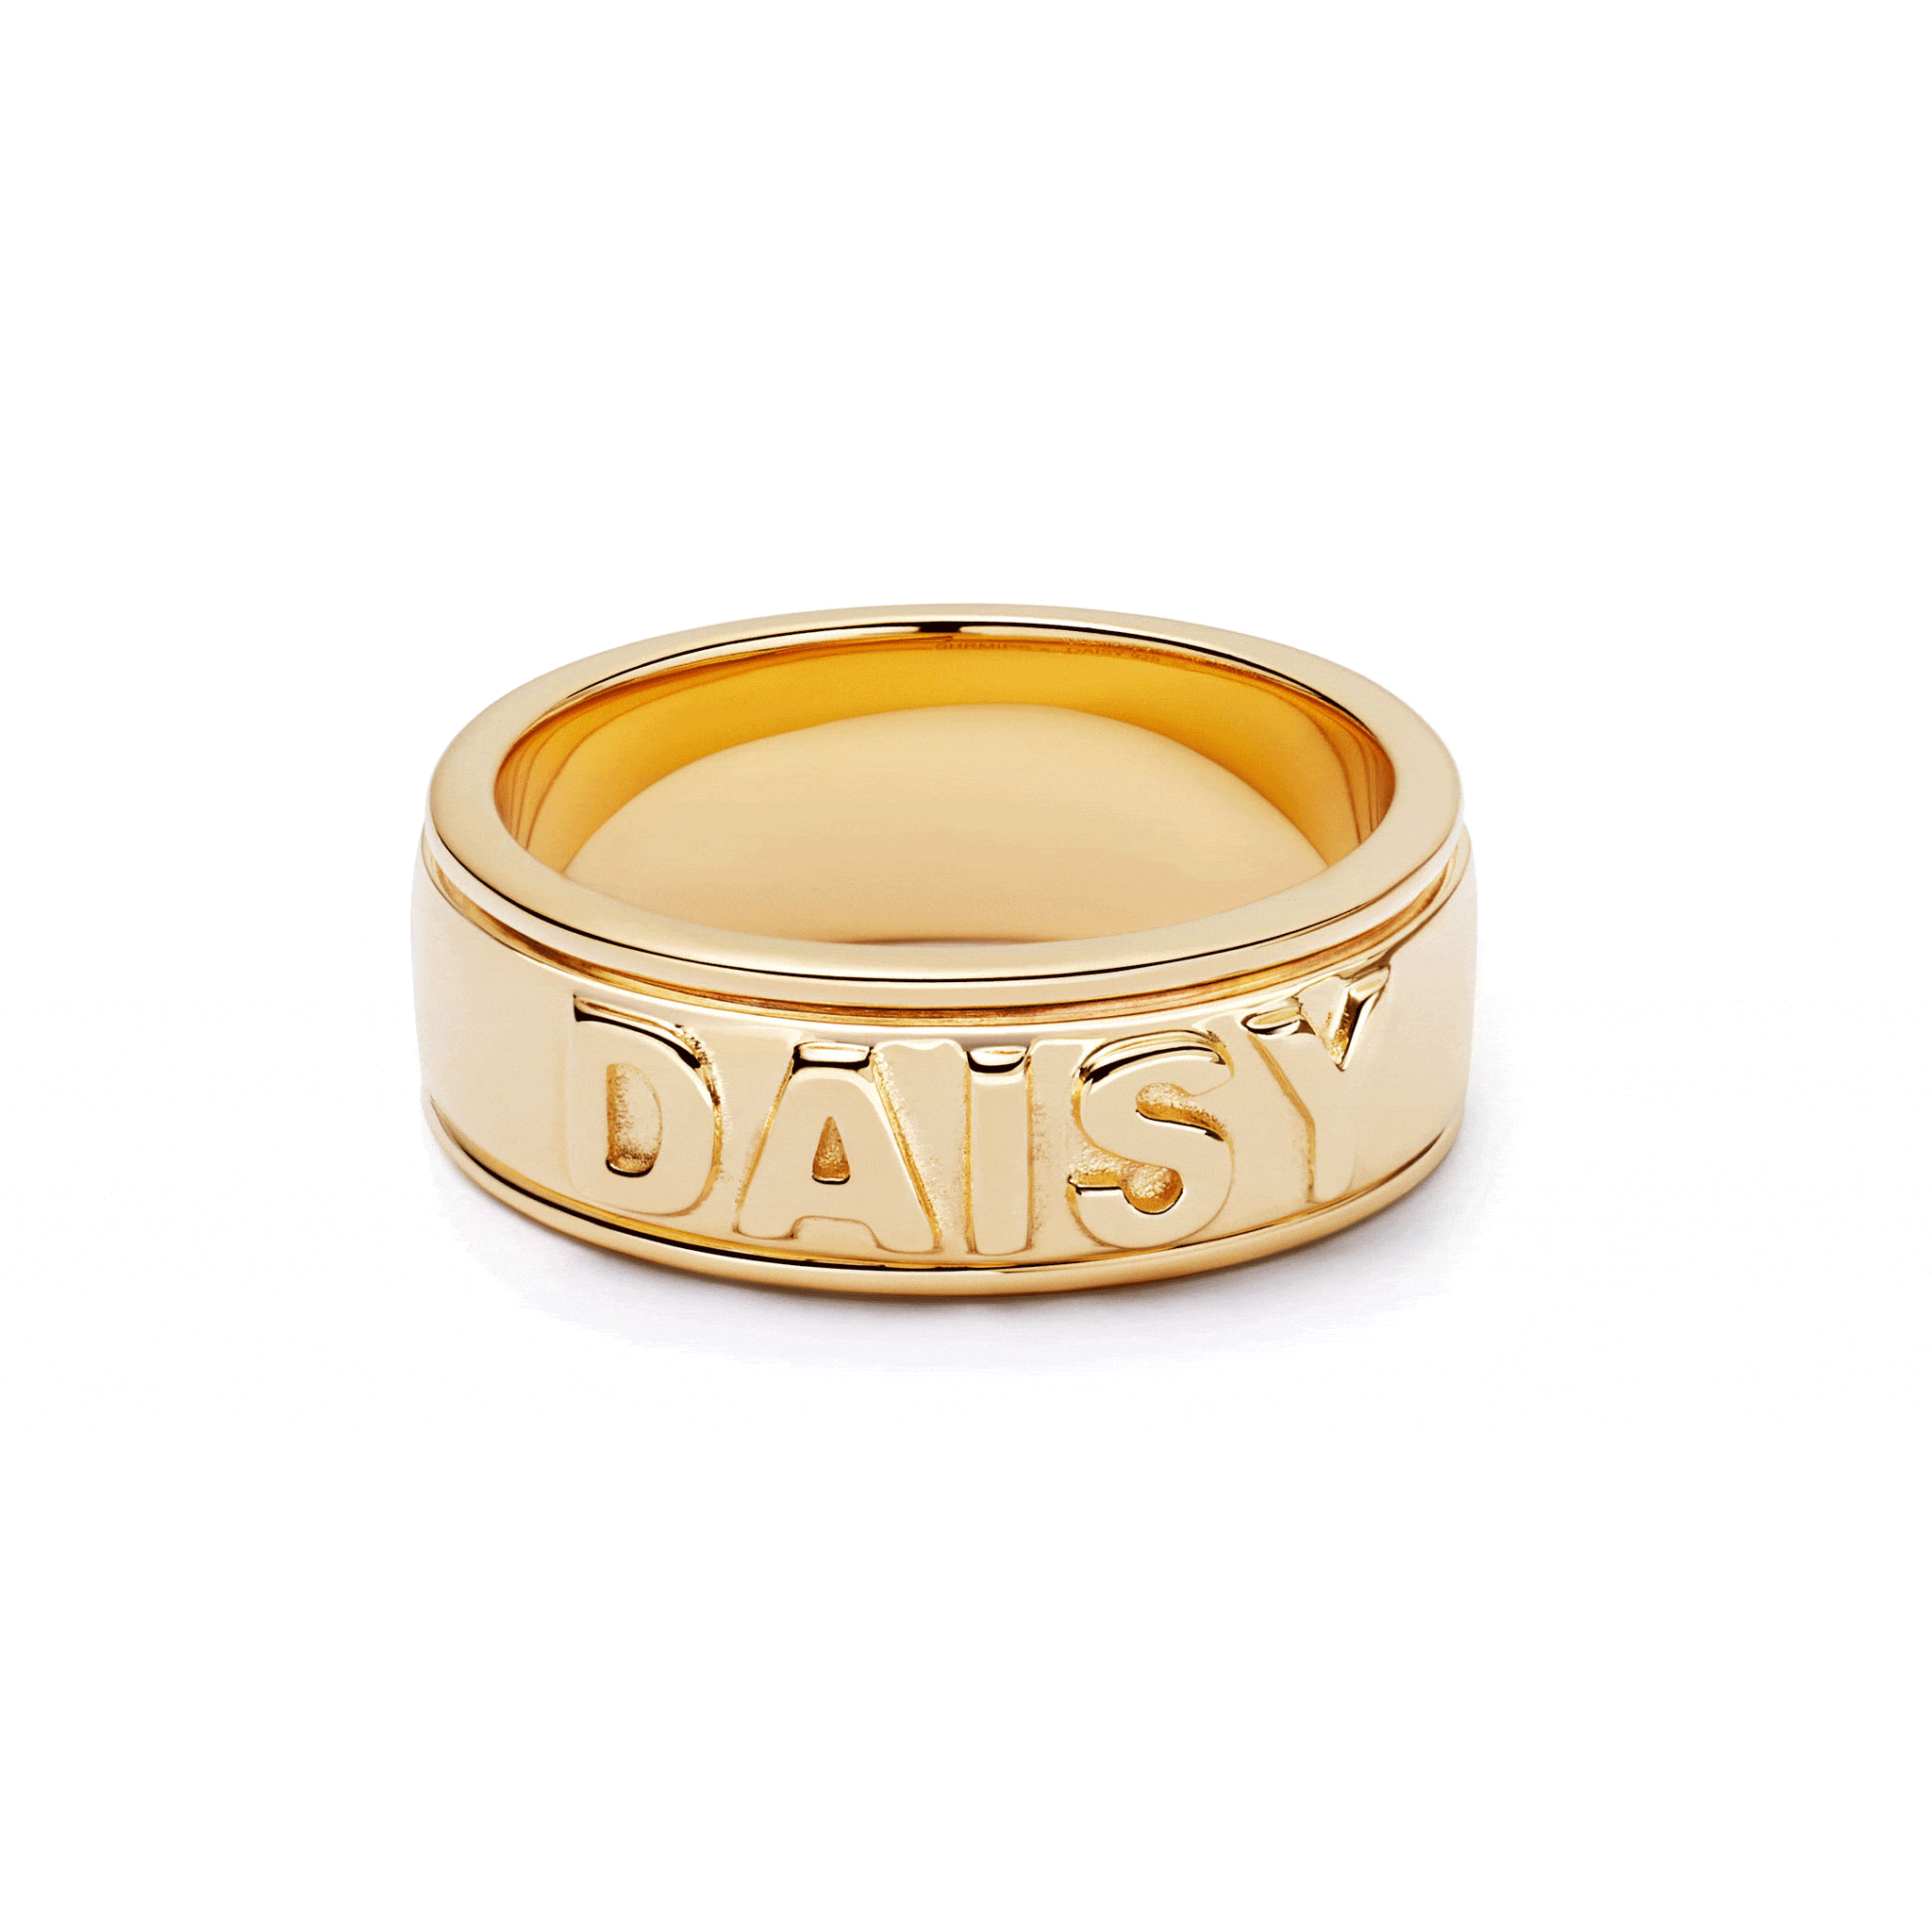 shrimps spinning ring 18ct gold plate rings daisy london